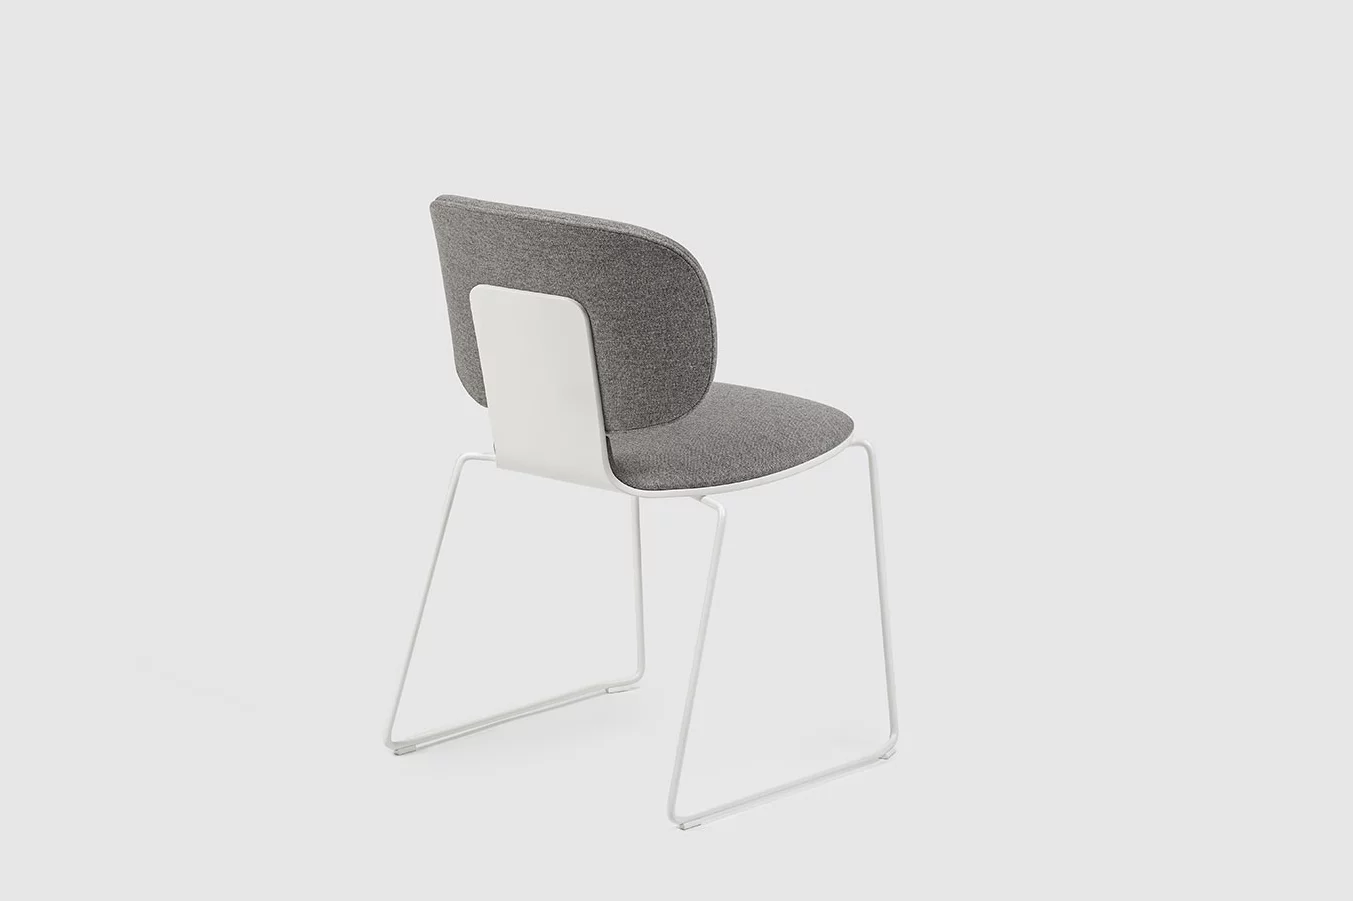 studio-chair-mit-kufengestell, Upholstered With armrests Non-pholstered Without armrests Skid Chair, Bene Office furniture, Image 2